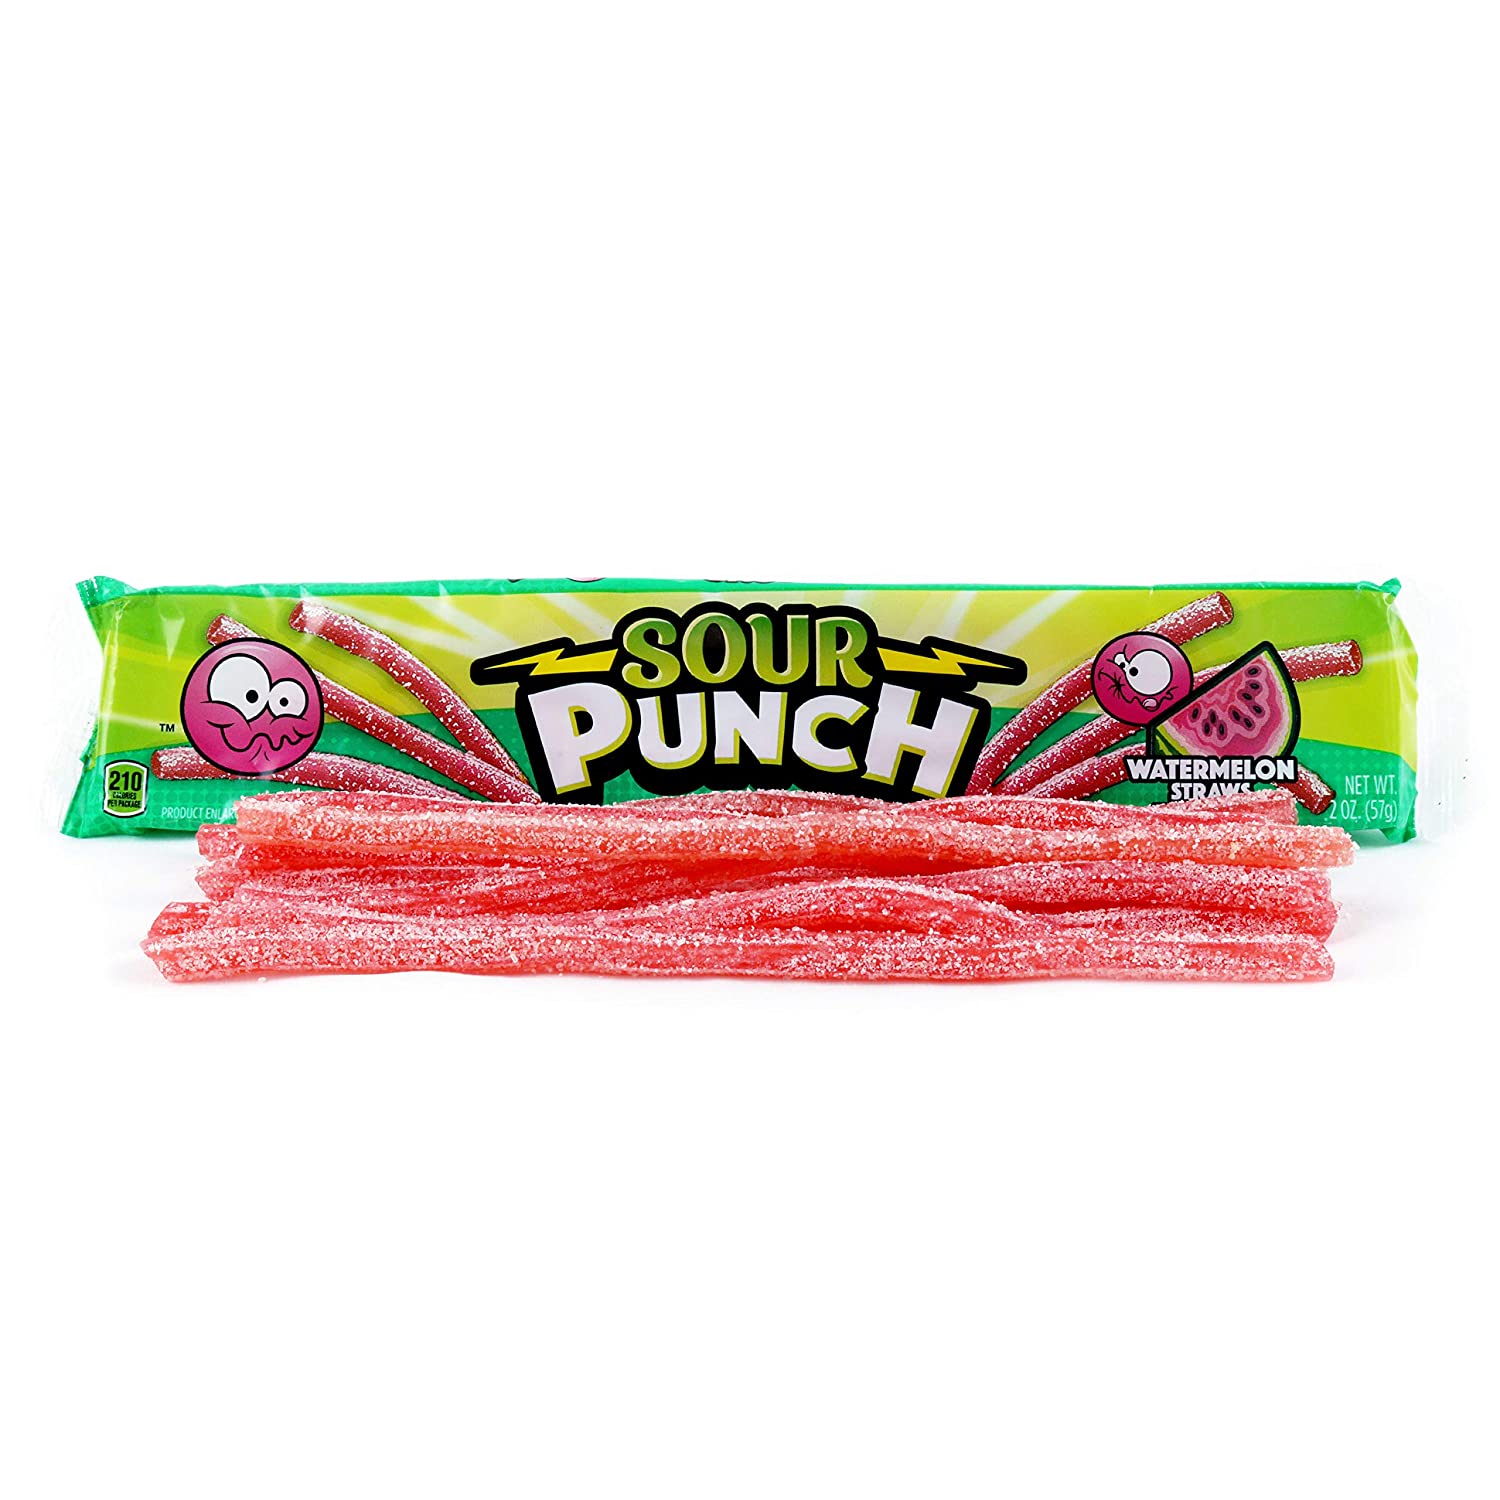 Sour Punch Watermelon-Sour Punch Straws-Watermelon Candy-Sour Candy